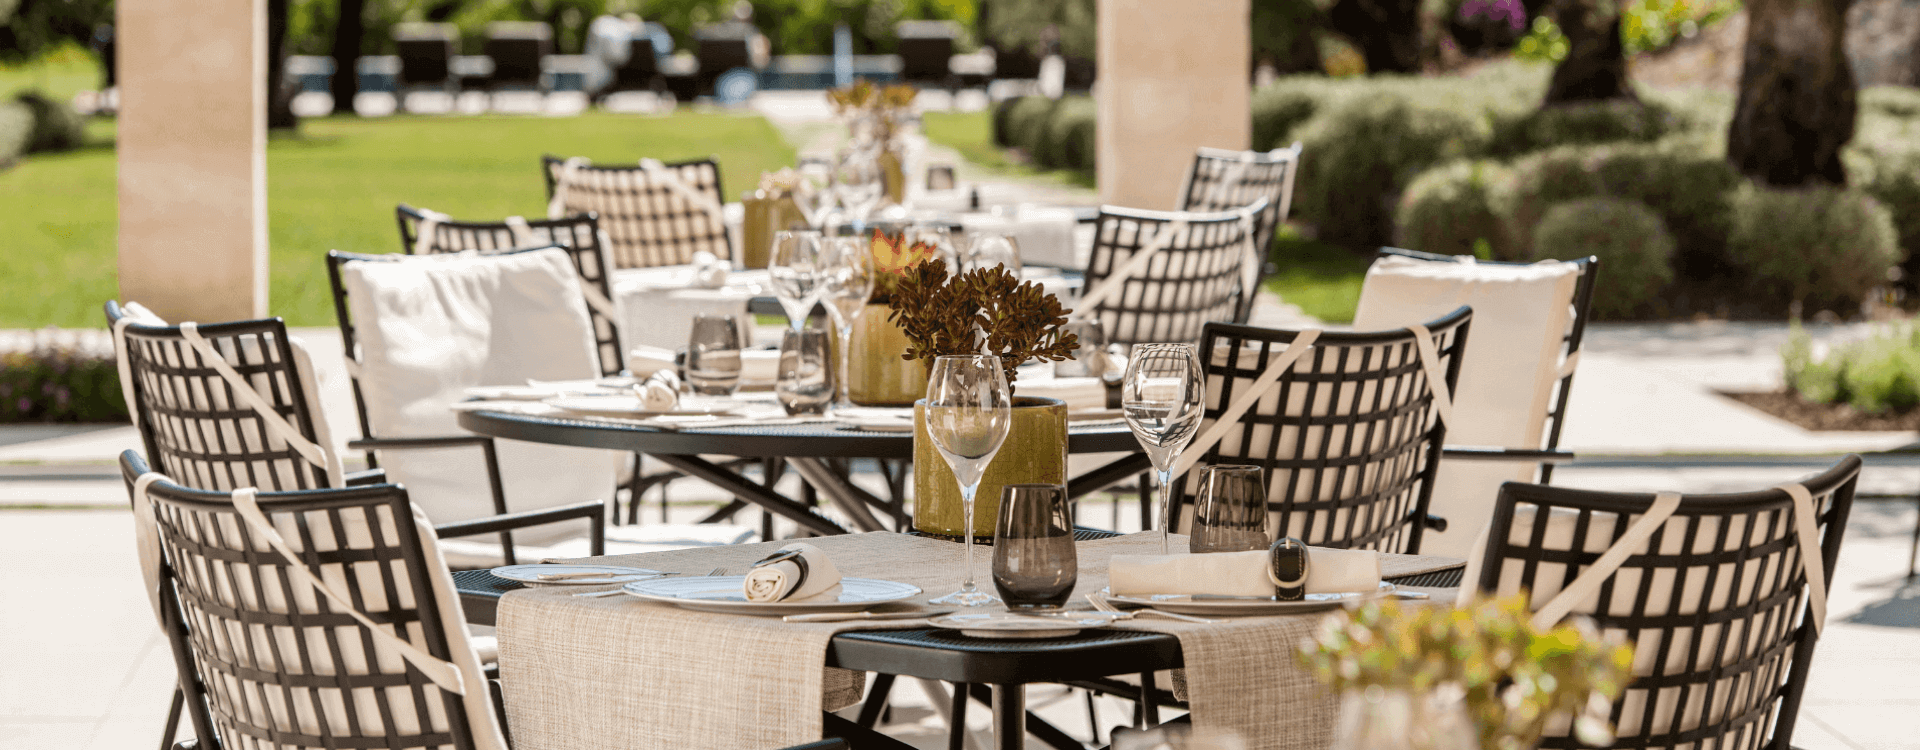 Several small tables set with plates, wine glasses, water glasses and flowers in the garden of the Hotel Castell Son Claret in Mallorca.